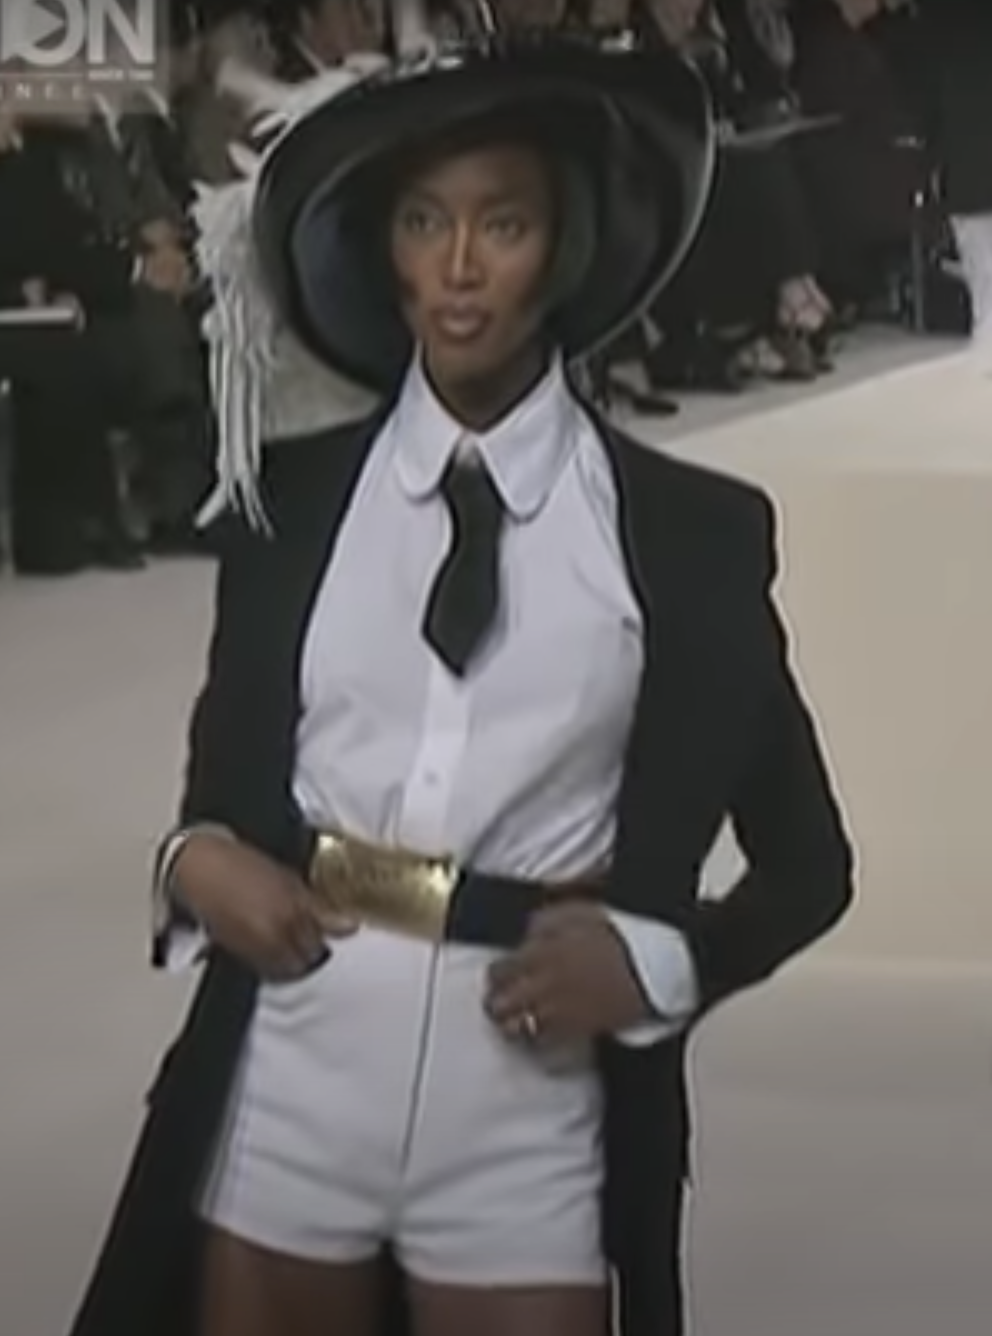 A rare, large Chanel Logo Waist Belt from 1997 -as worn on the runway by Naomi Campbell and Stella Tenant. It features a very large gold bar with CHANEL logo at the front, internal logo foil stamp and date, and gold buckle at rear. 